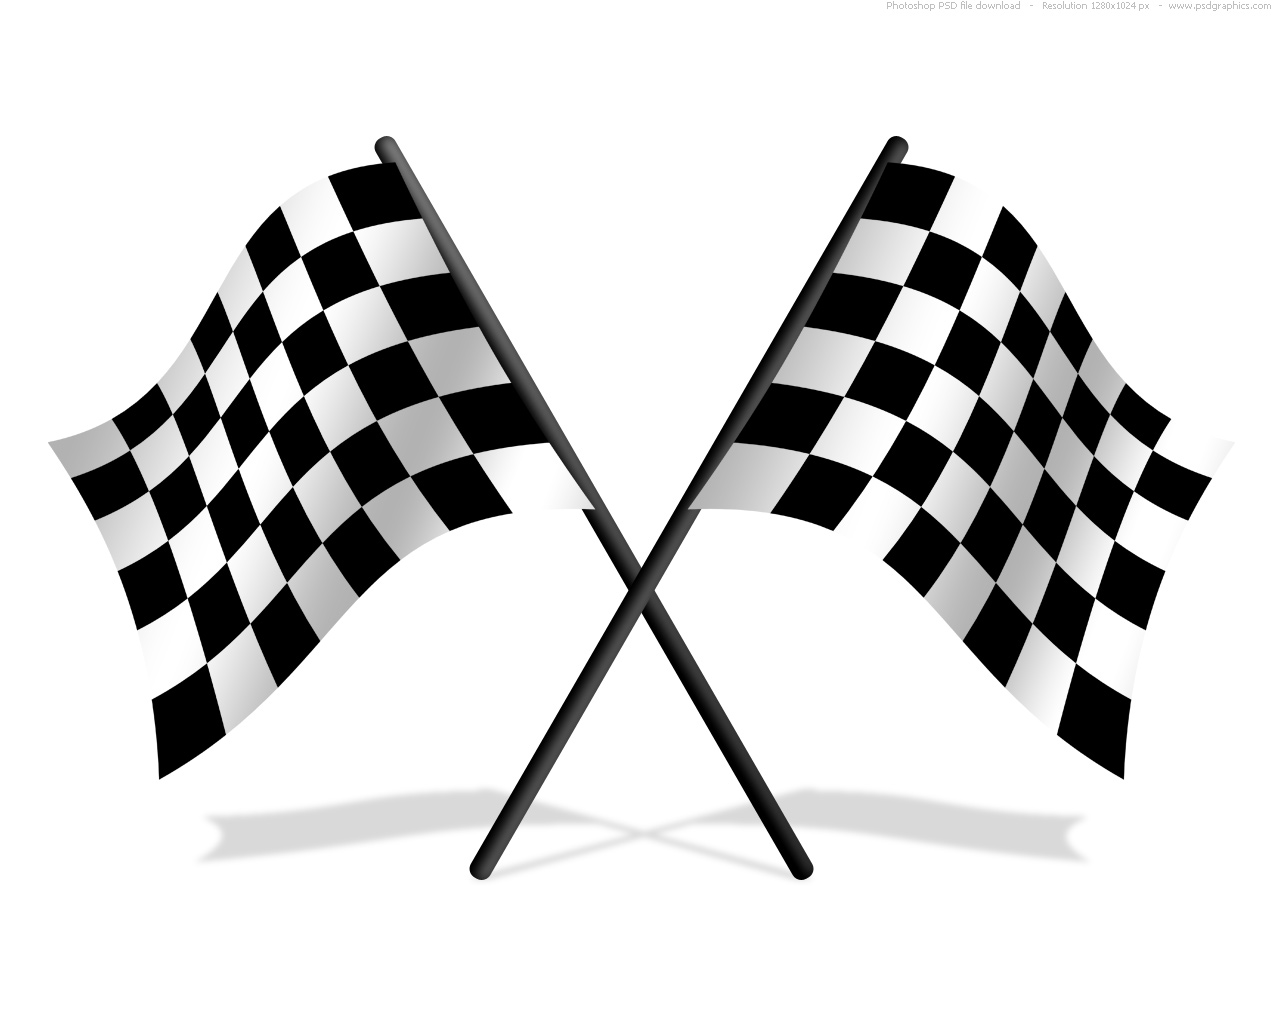 Checkered Flags Psd Icon   Psdgraphics